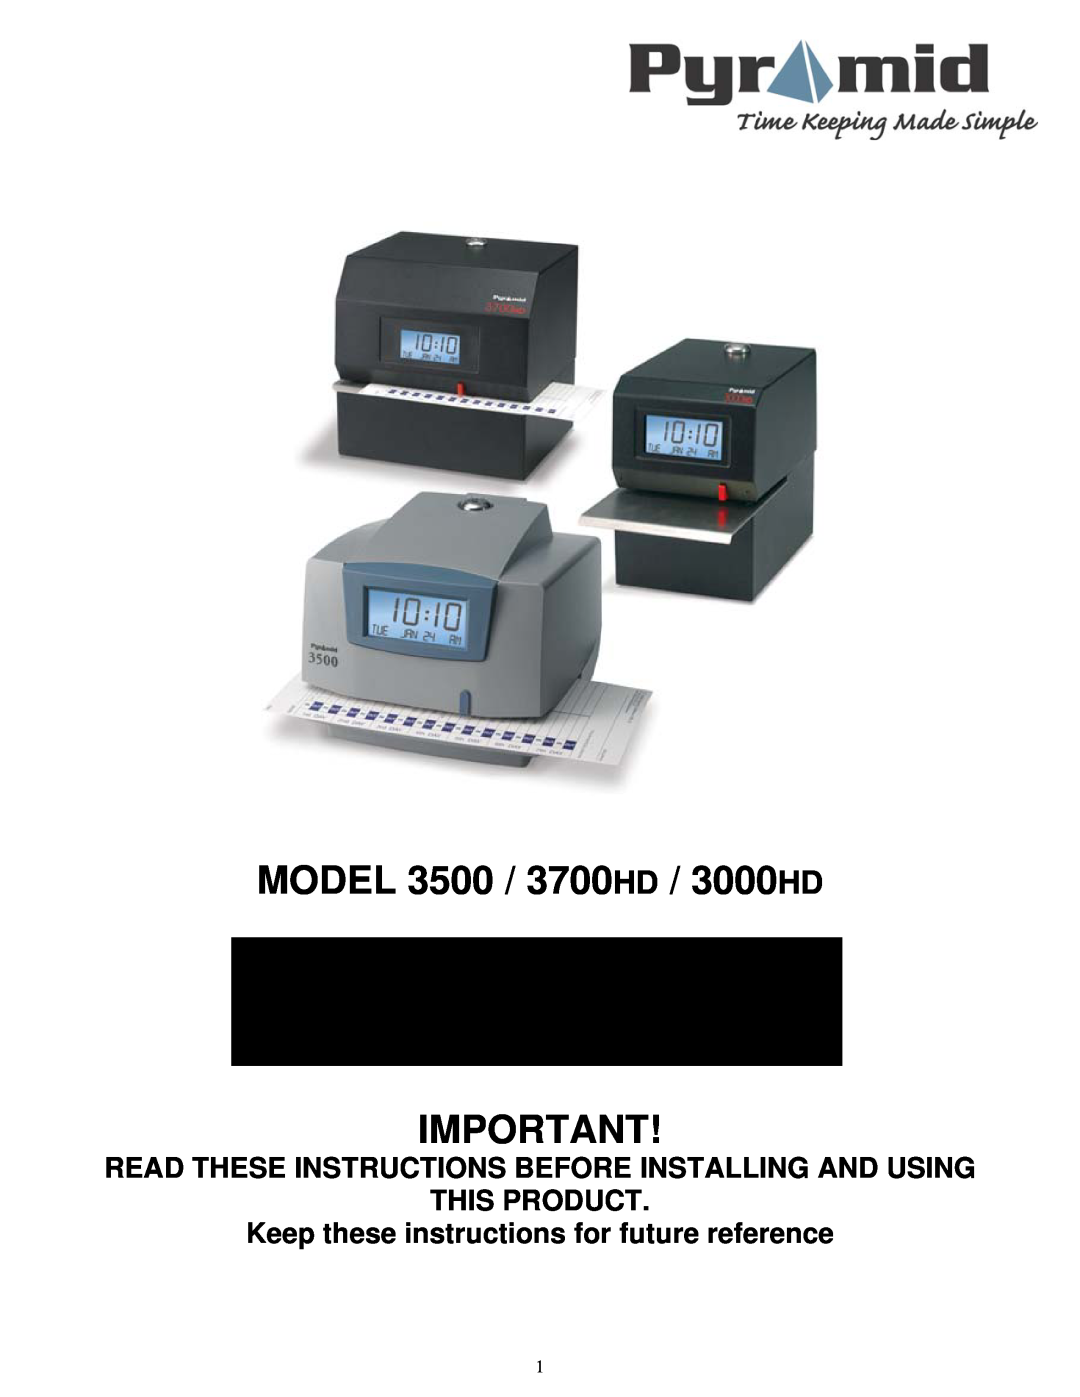 Pyramid Technologies manual MODEL 3500 / 3700HD / 3000HD, Keep these instructions for future reference 